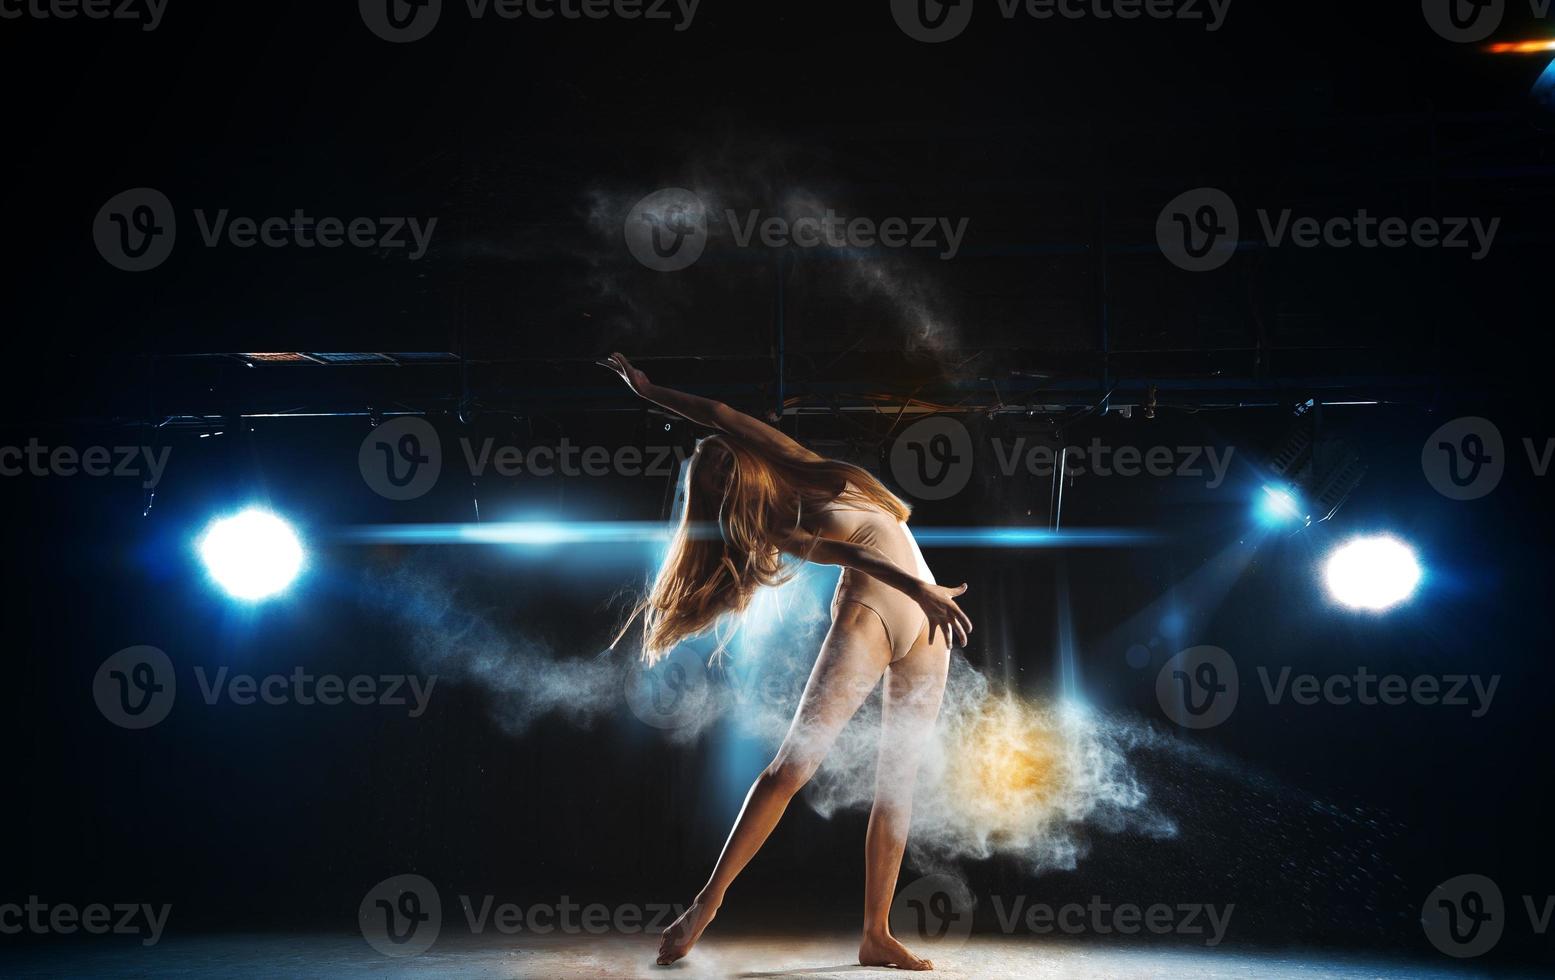 Sexy ballerina on stage posing against the backdrop of the spotlight photo